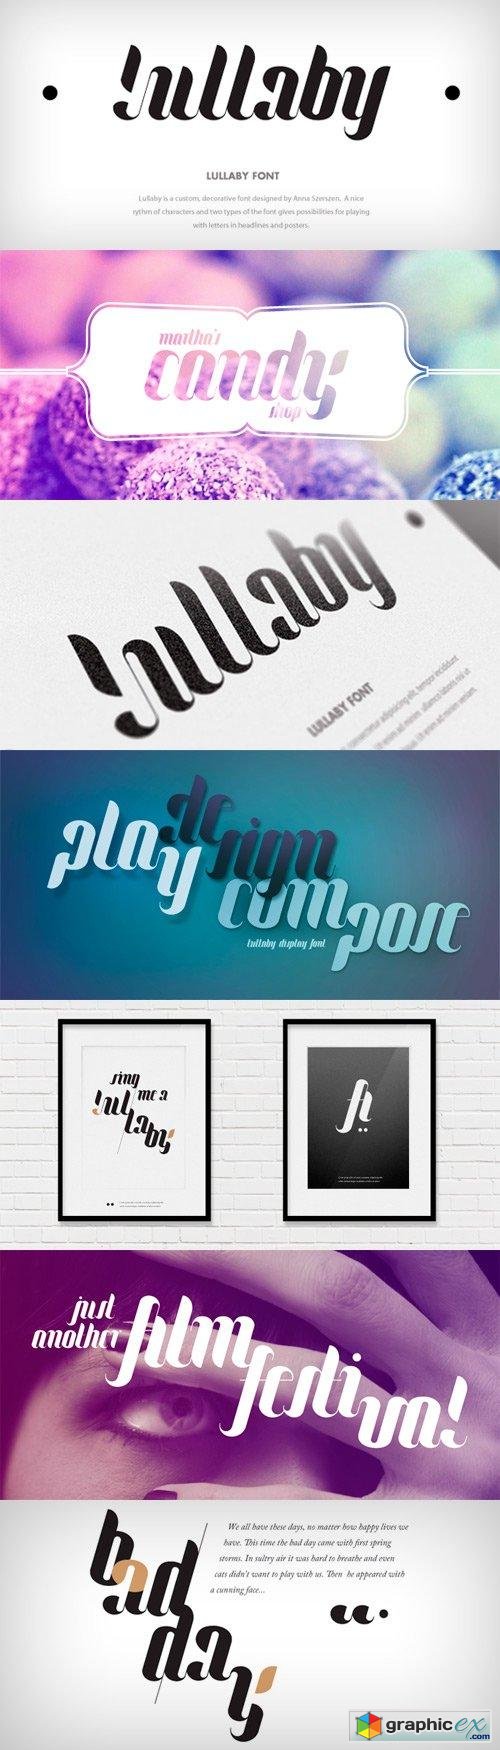 Lullaby Font for $20